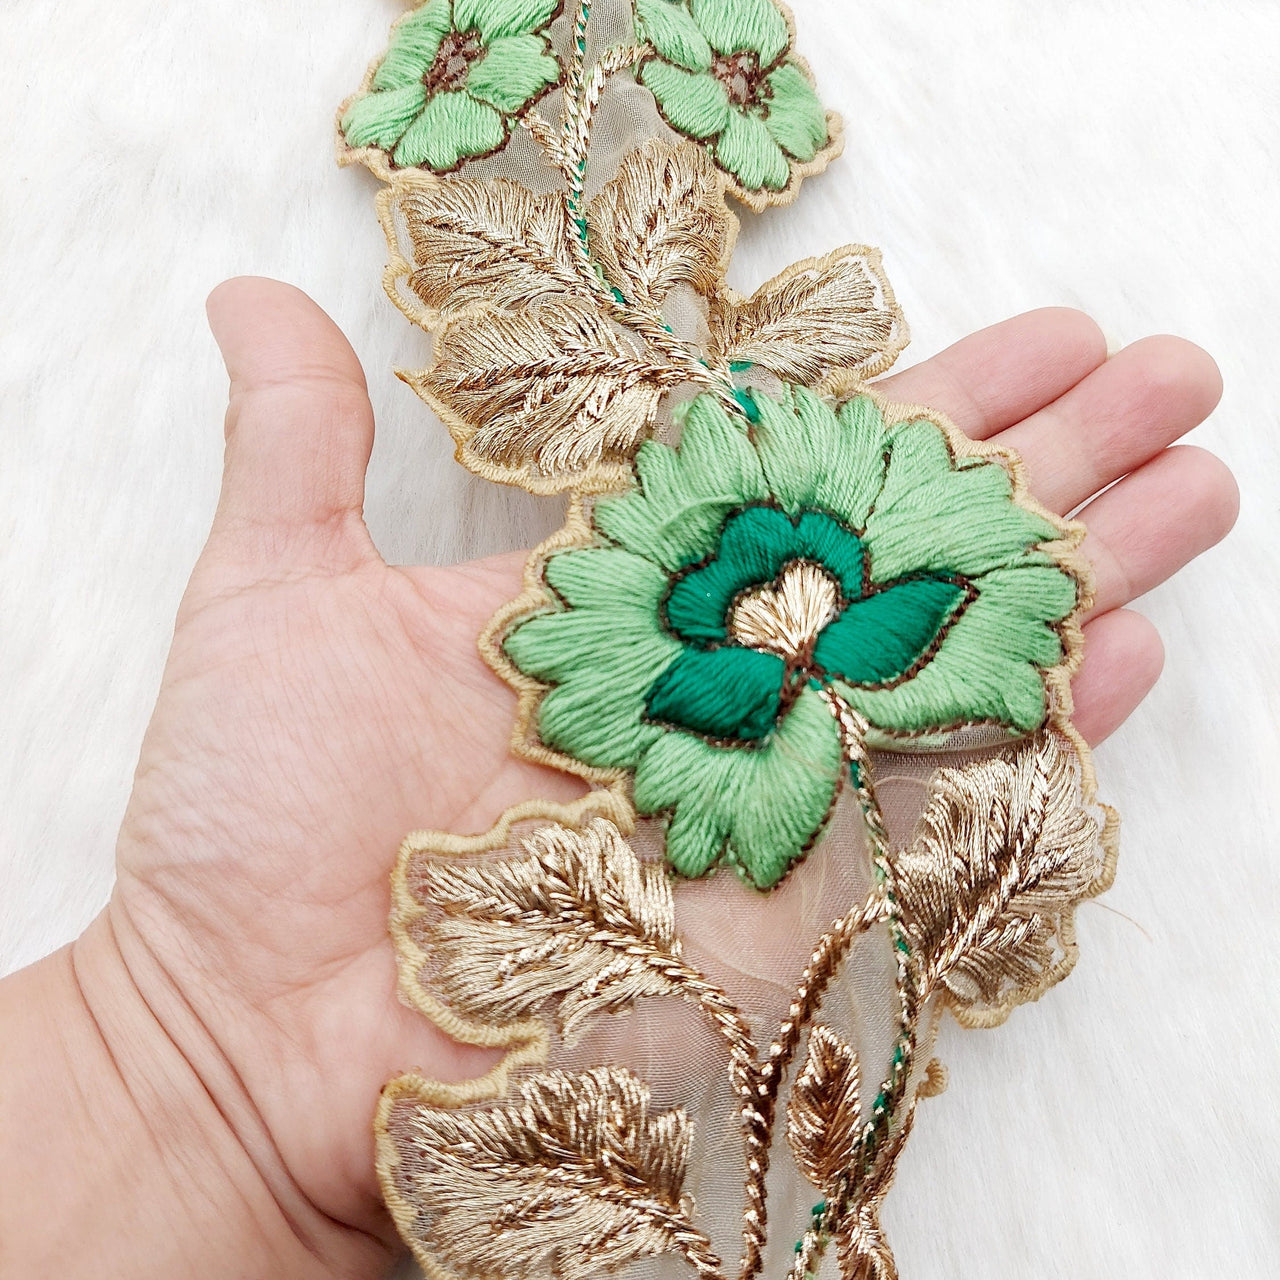 Green and Gold Floral Embroidered Trim, Tissue Fabric Cutwork Lace Flowers Embroidery, Floral Sari Trimming